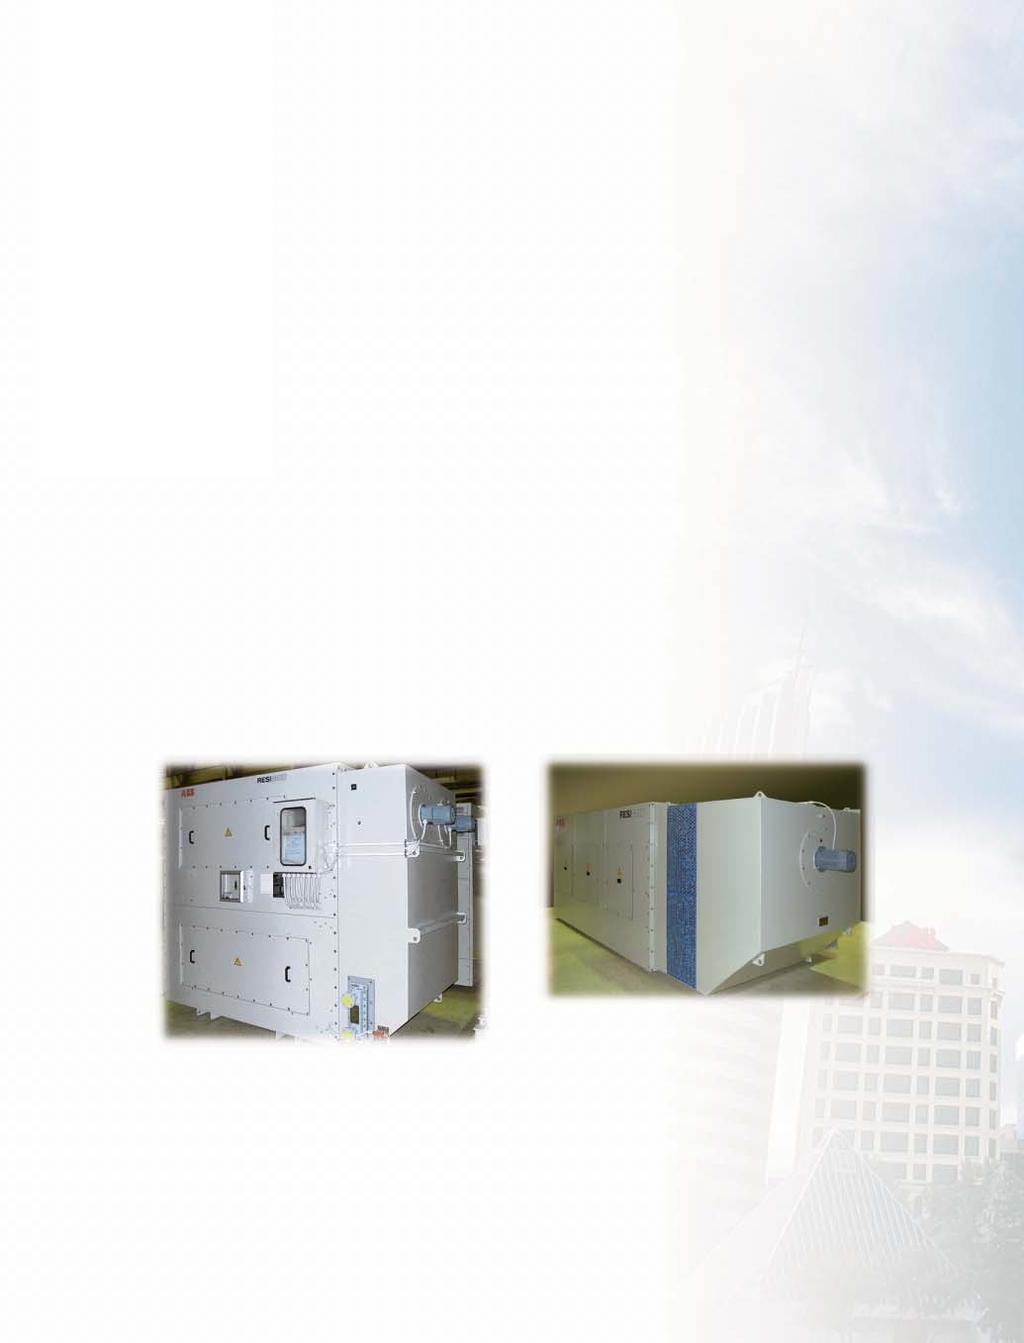 RESIBLOC - special designs for special applications Although the standard design of RESIBLOC cast resin transformers and regularly manufactured enclosures satisfy most of our customers needs, special